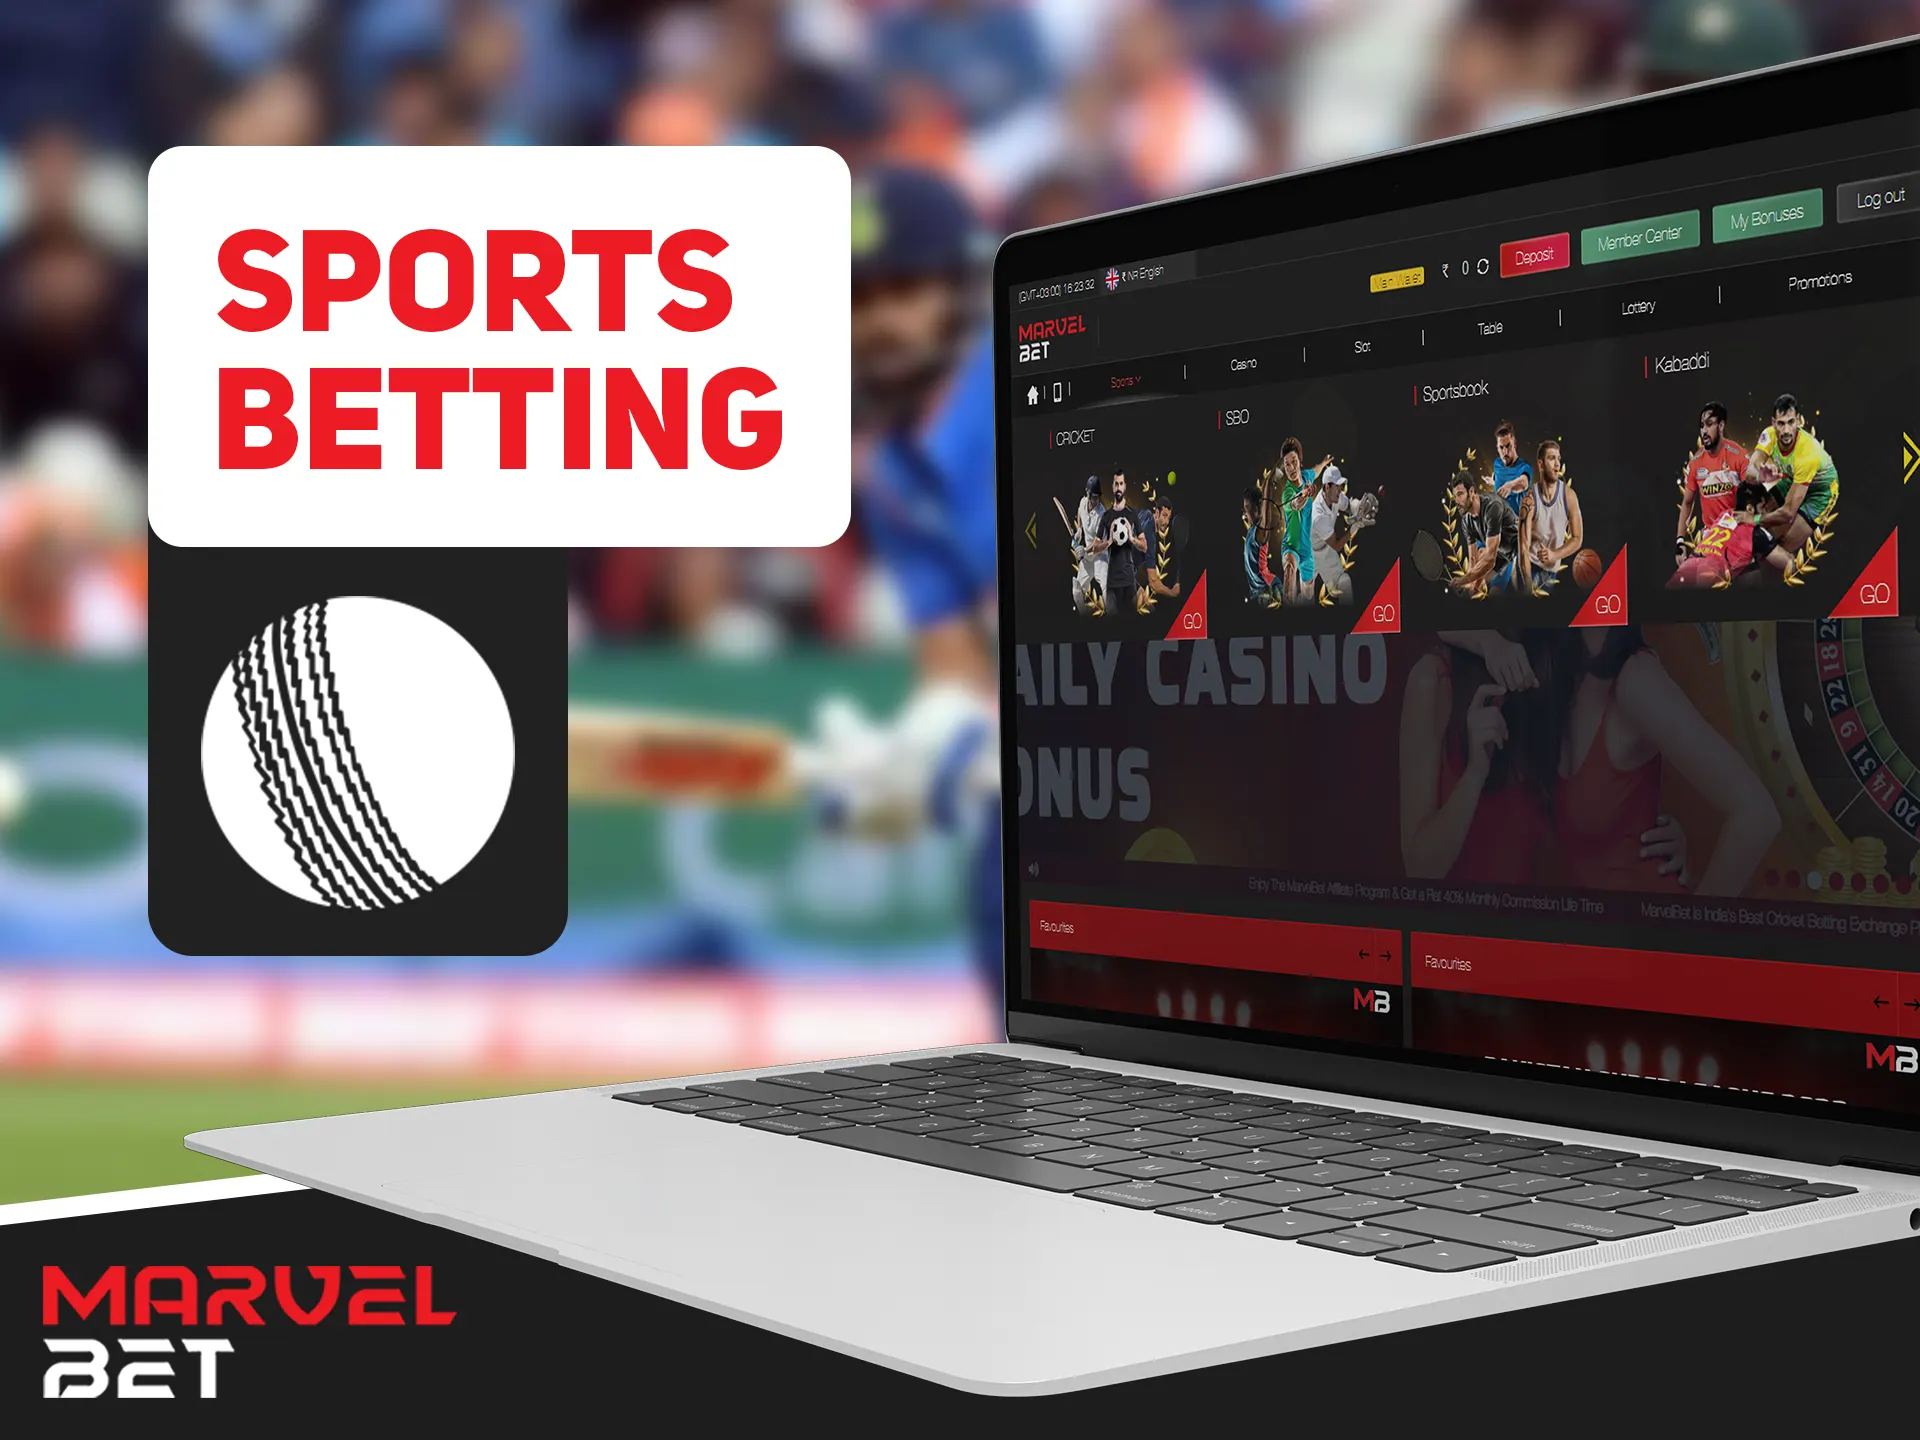 Bet on multiple of sports on Marvelbet sports betting page.